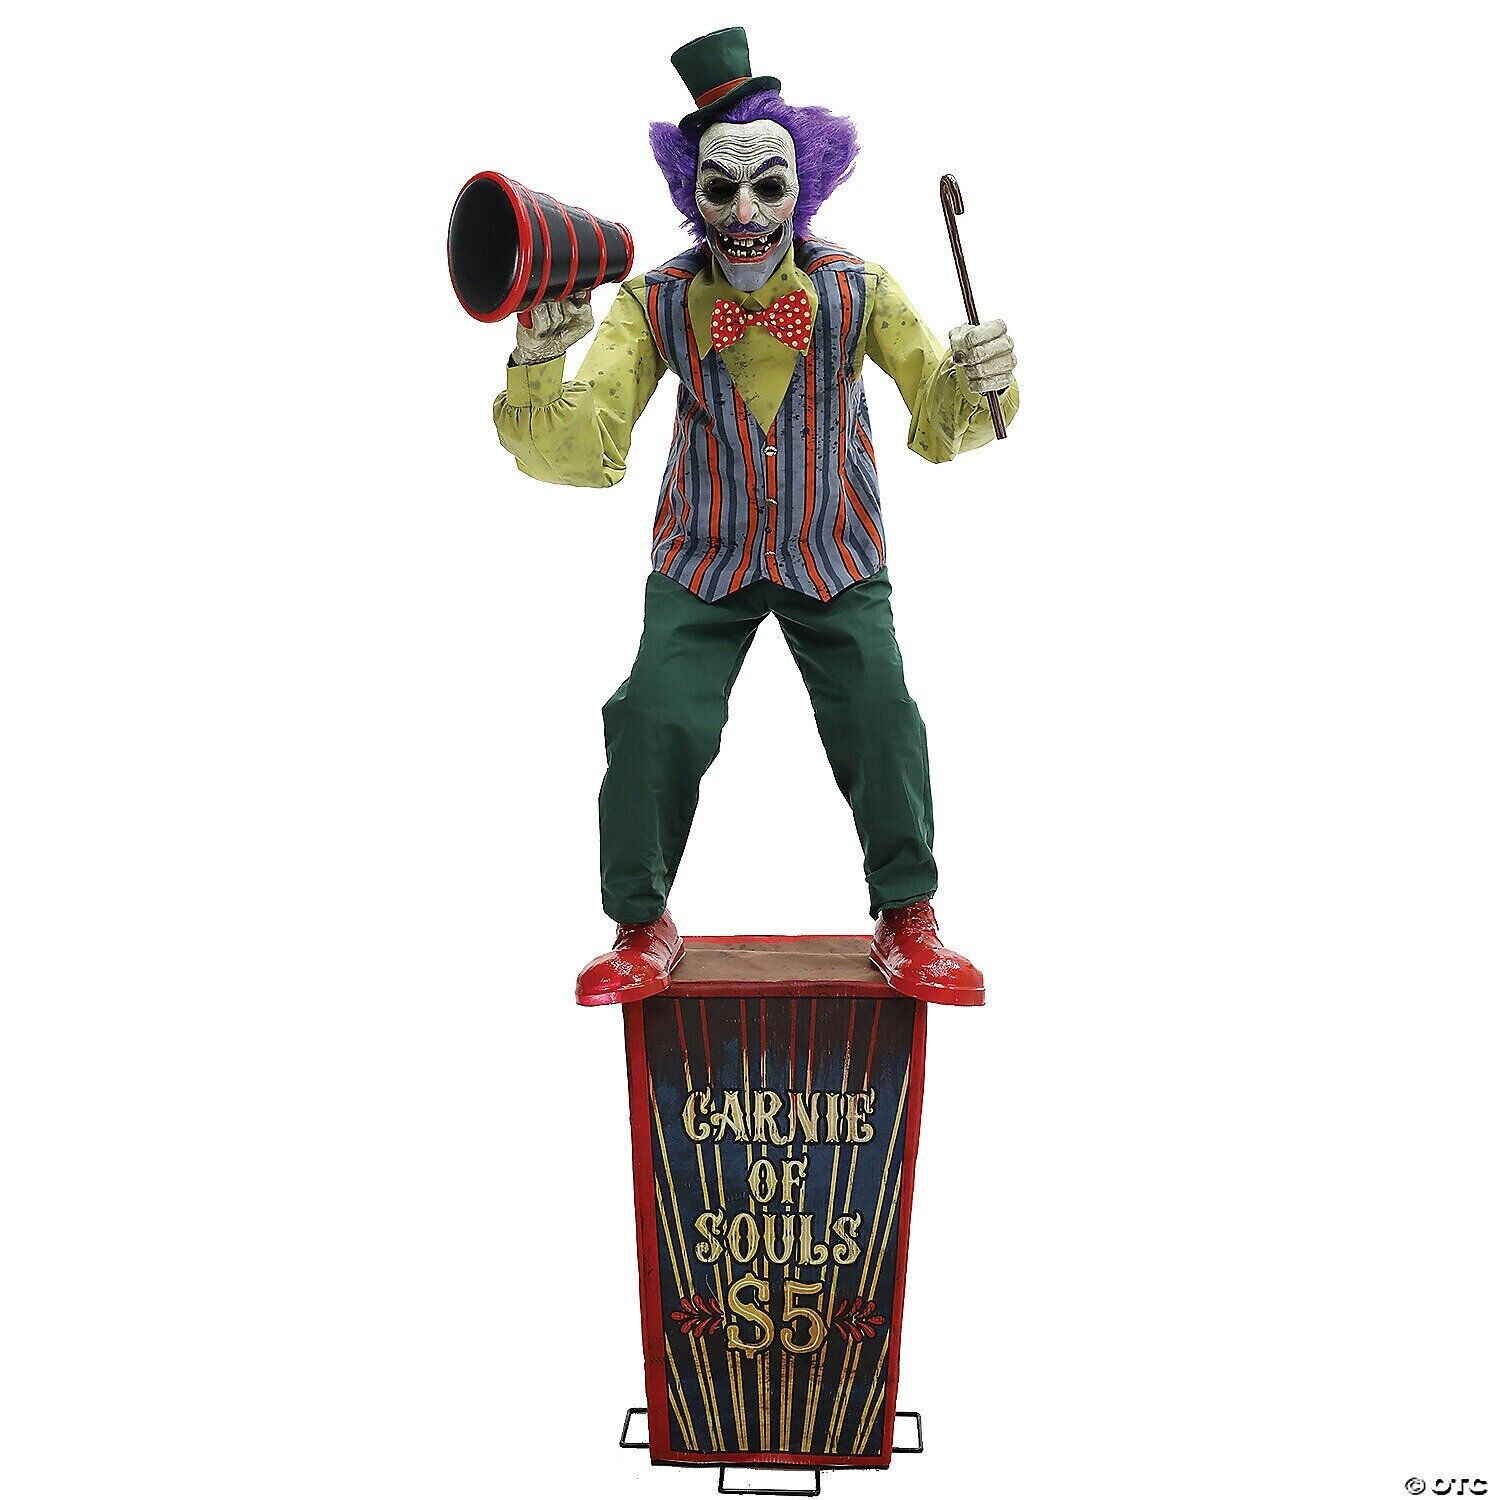 New Creepy Carnival Barker - Animated Halloween or Haunted House Prop